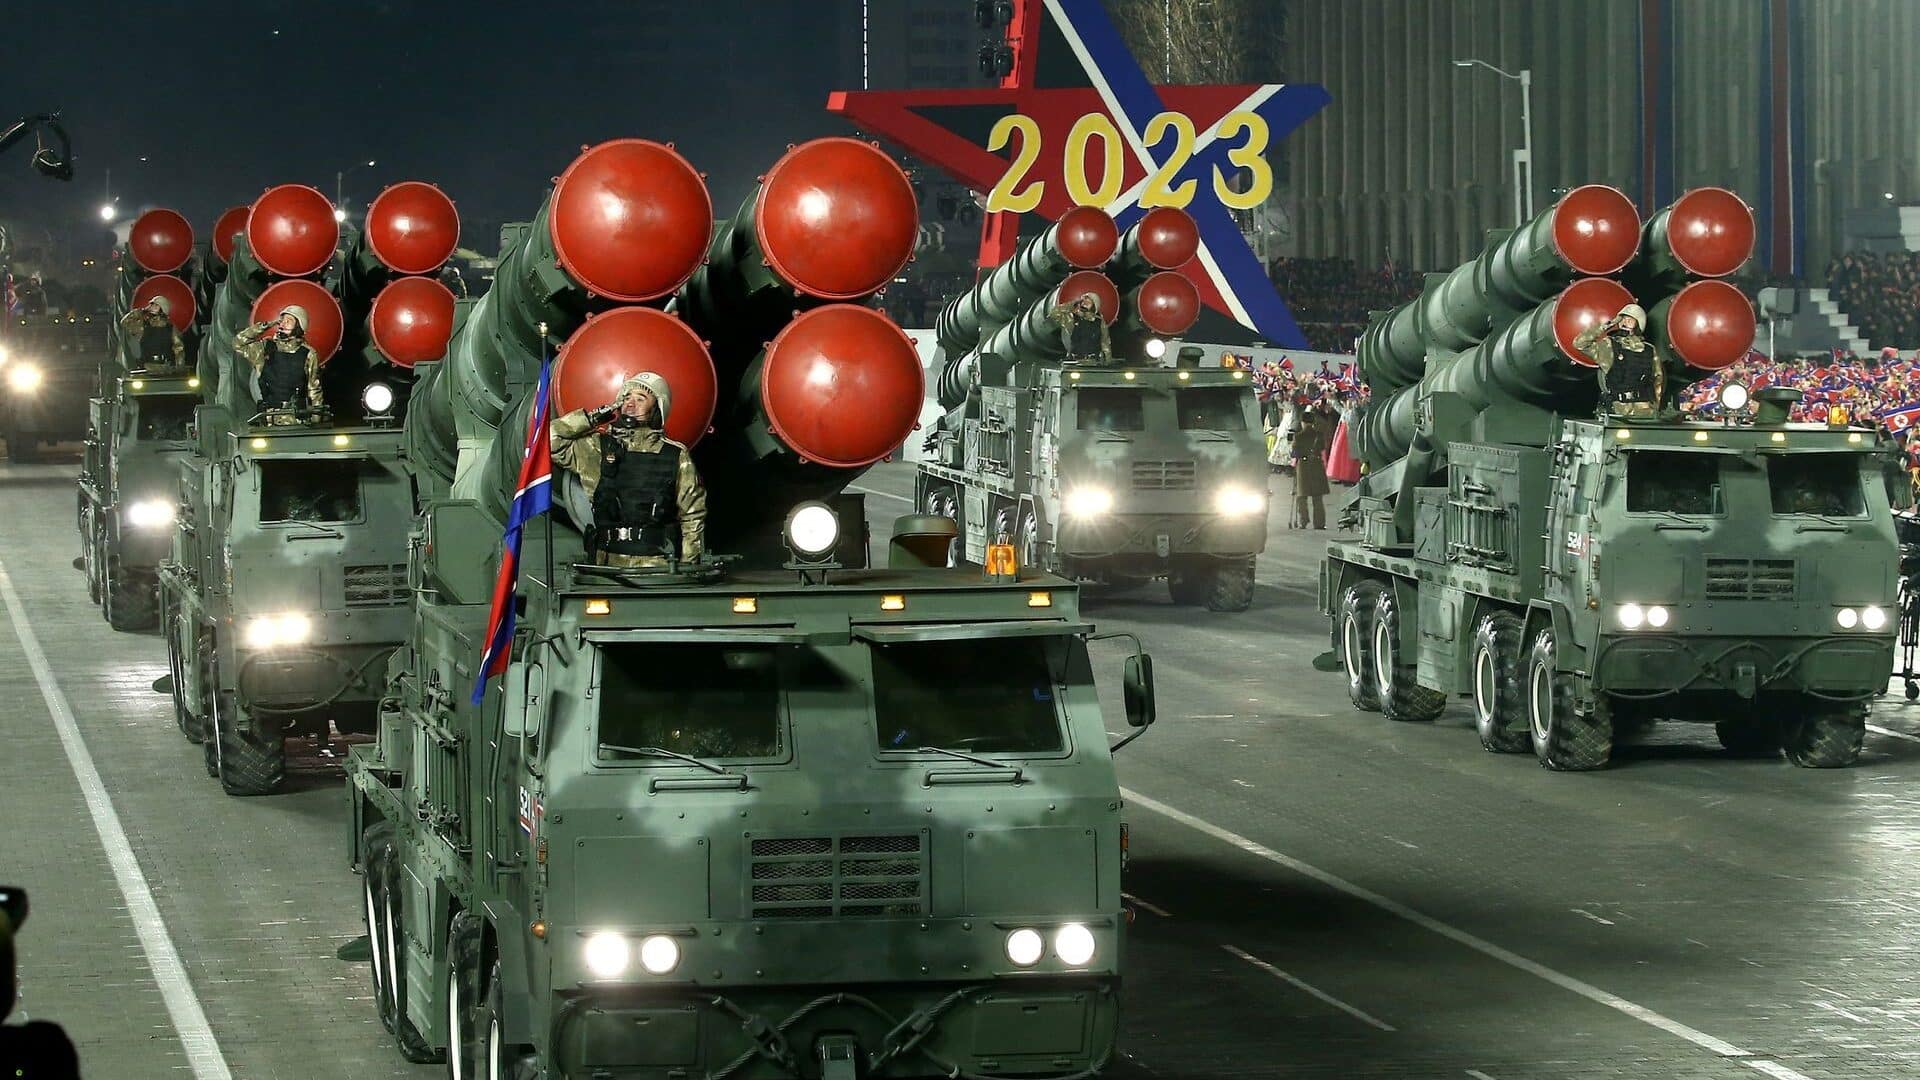 Korean missiles on display at the Military Parade.